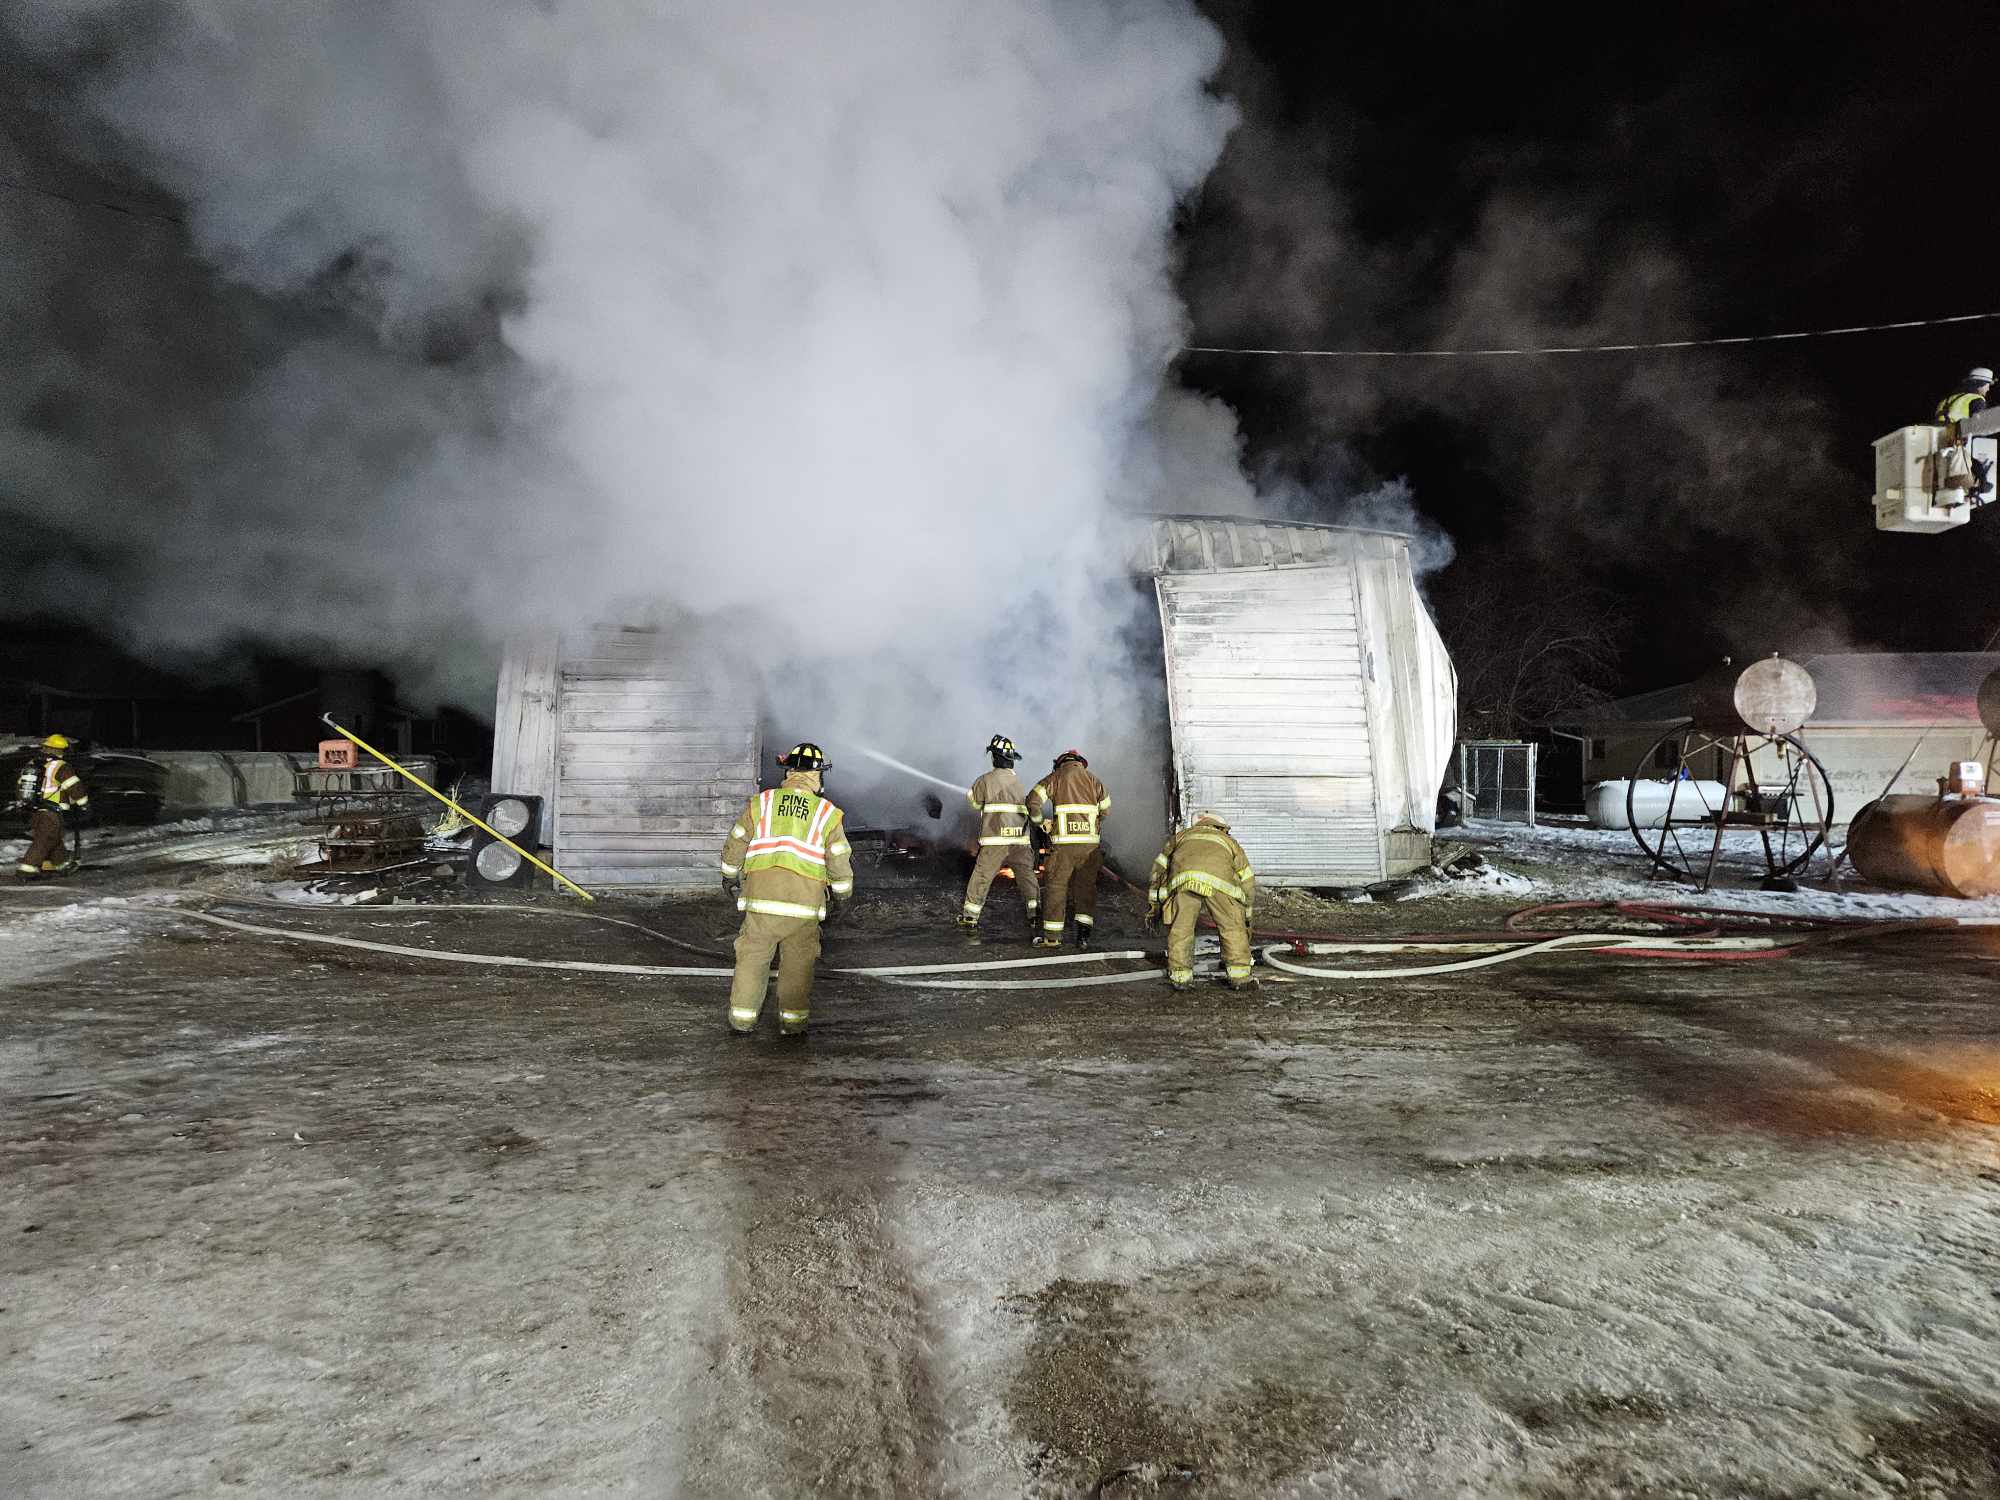 Fire destroys machine shed in Town of Pine River